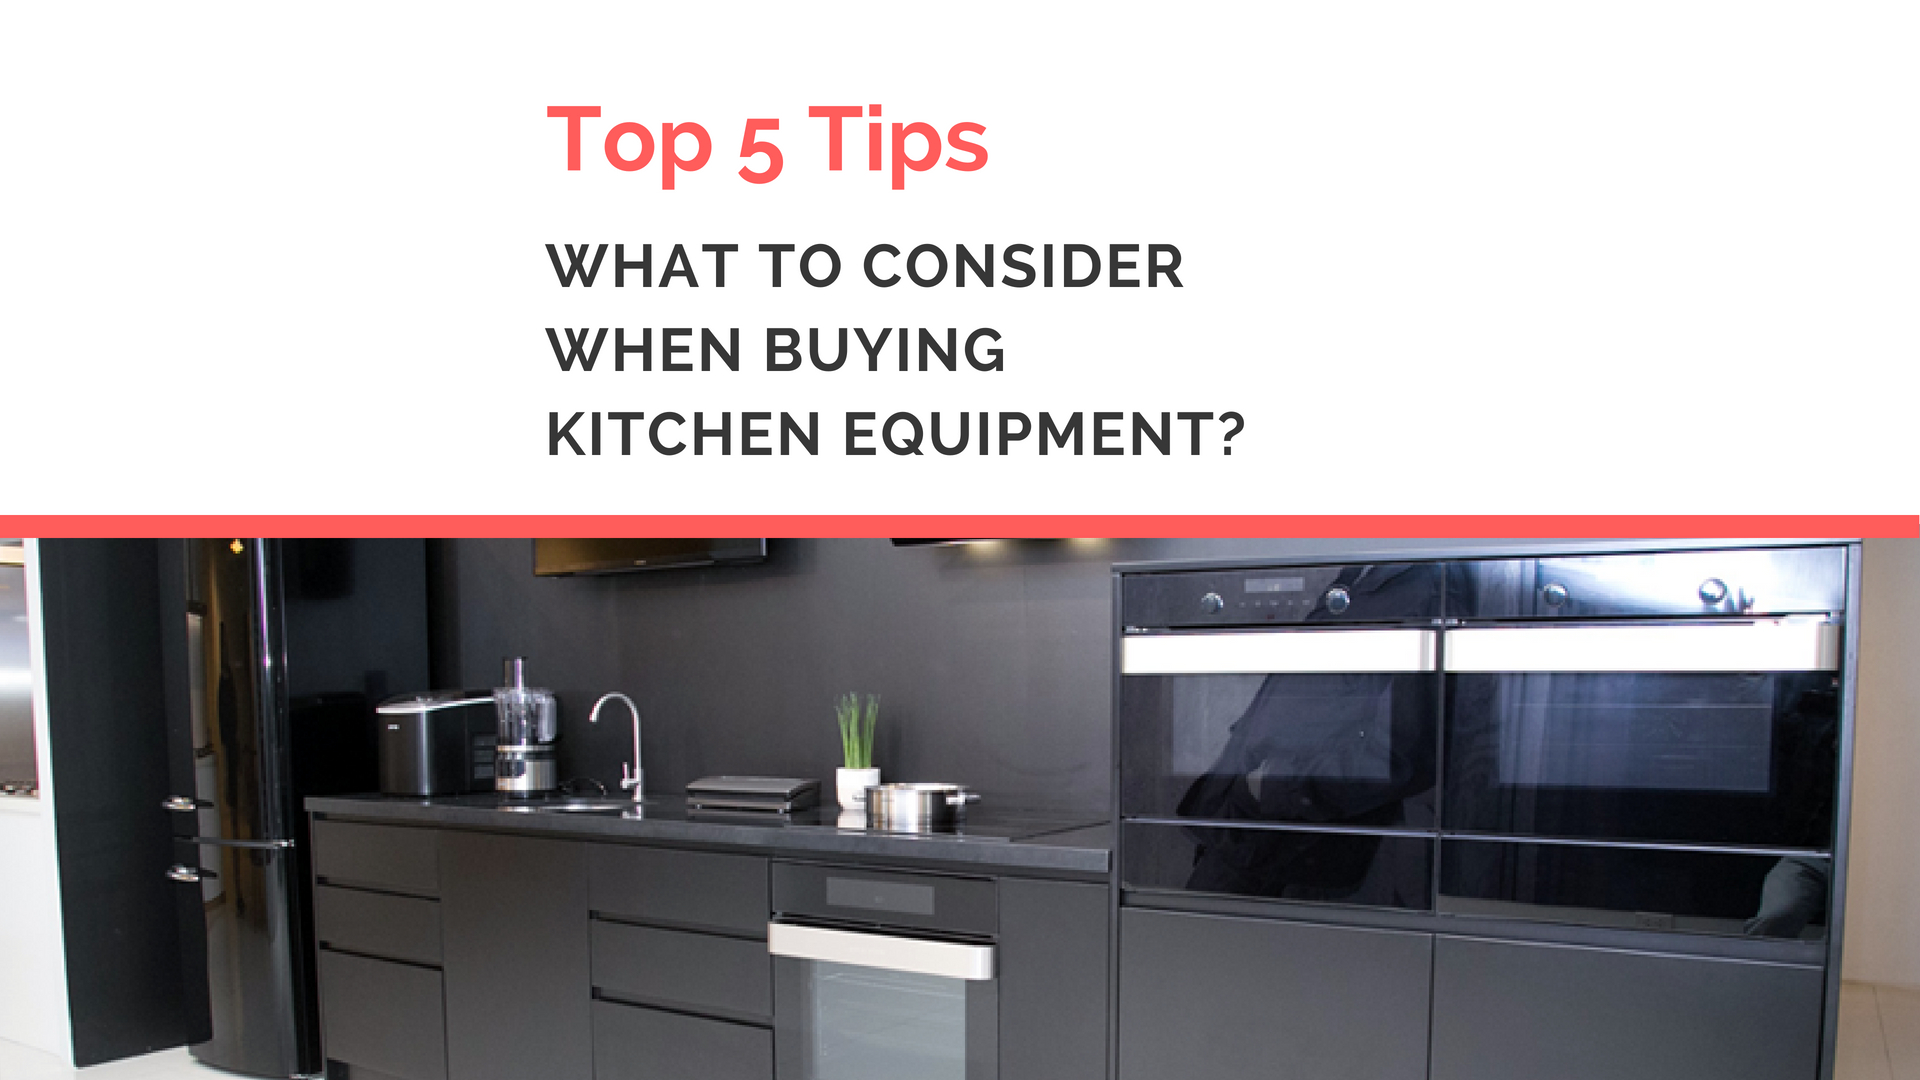 What Should you Consider when Buying Kitchen Equipment?